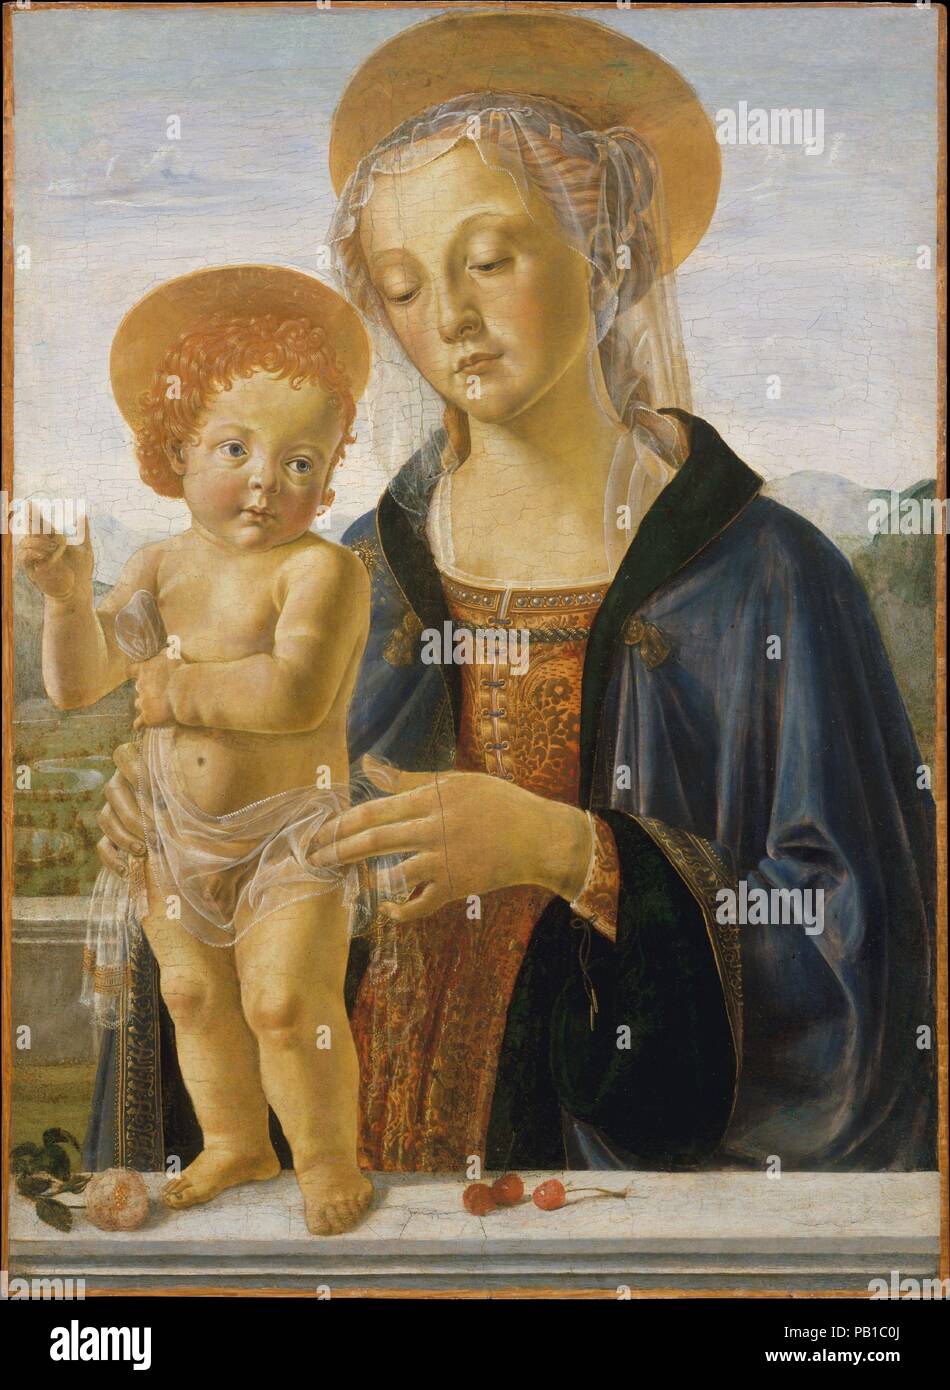 Madonna and Child. Artist: Workshop of Andrea del Verrocchio (Italian, Florence 1435-1488 Venice). Dimensions: 26 x 19 in. (66 x 48.3 cm). Date: ca. 1470.  Verrocchio, a great sculptor, painter, and draftsman ran the most prestigious workshop of the last third of the fifteenth century in Florence. (Botticelli and the young Leonardo were among those associated with the shop.) This picture is of fine quality and is based on a design by Verrocchio. It dates about 1470. Although the left side of the Madonna's face is badly damaged, passages such as the Child's head convey the original quality of t Stock Photo